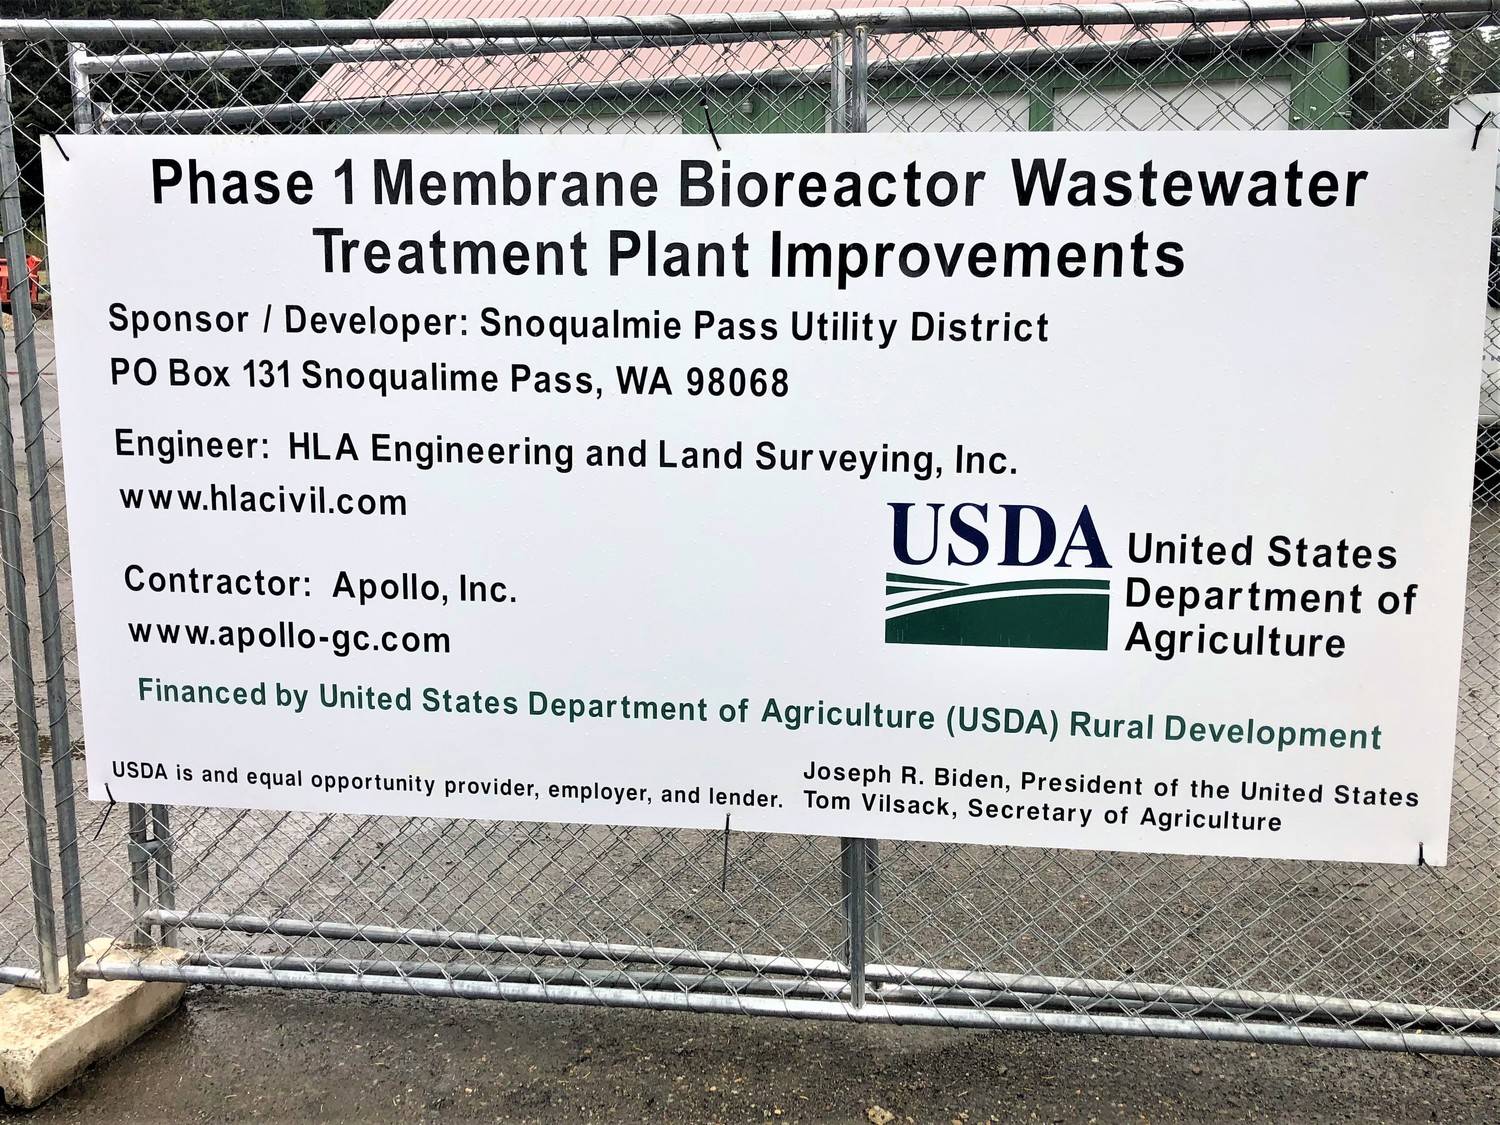 Snoqualmie Pass Utility District - Phase 1 MBR